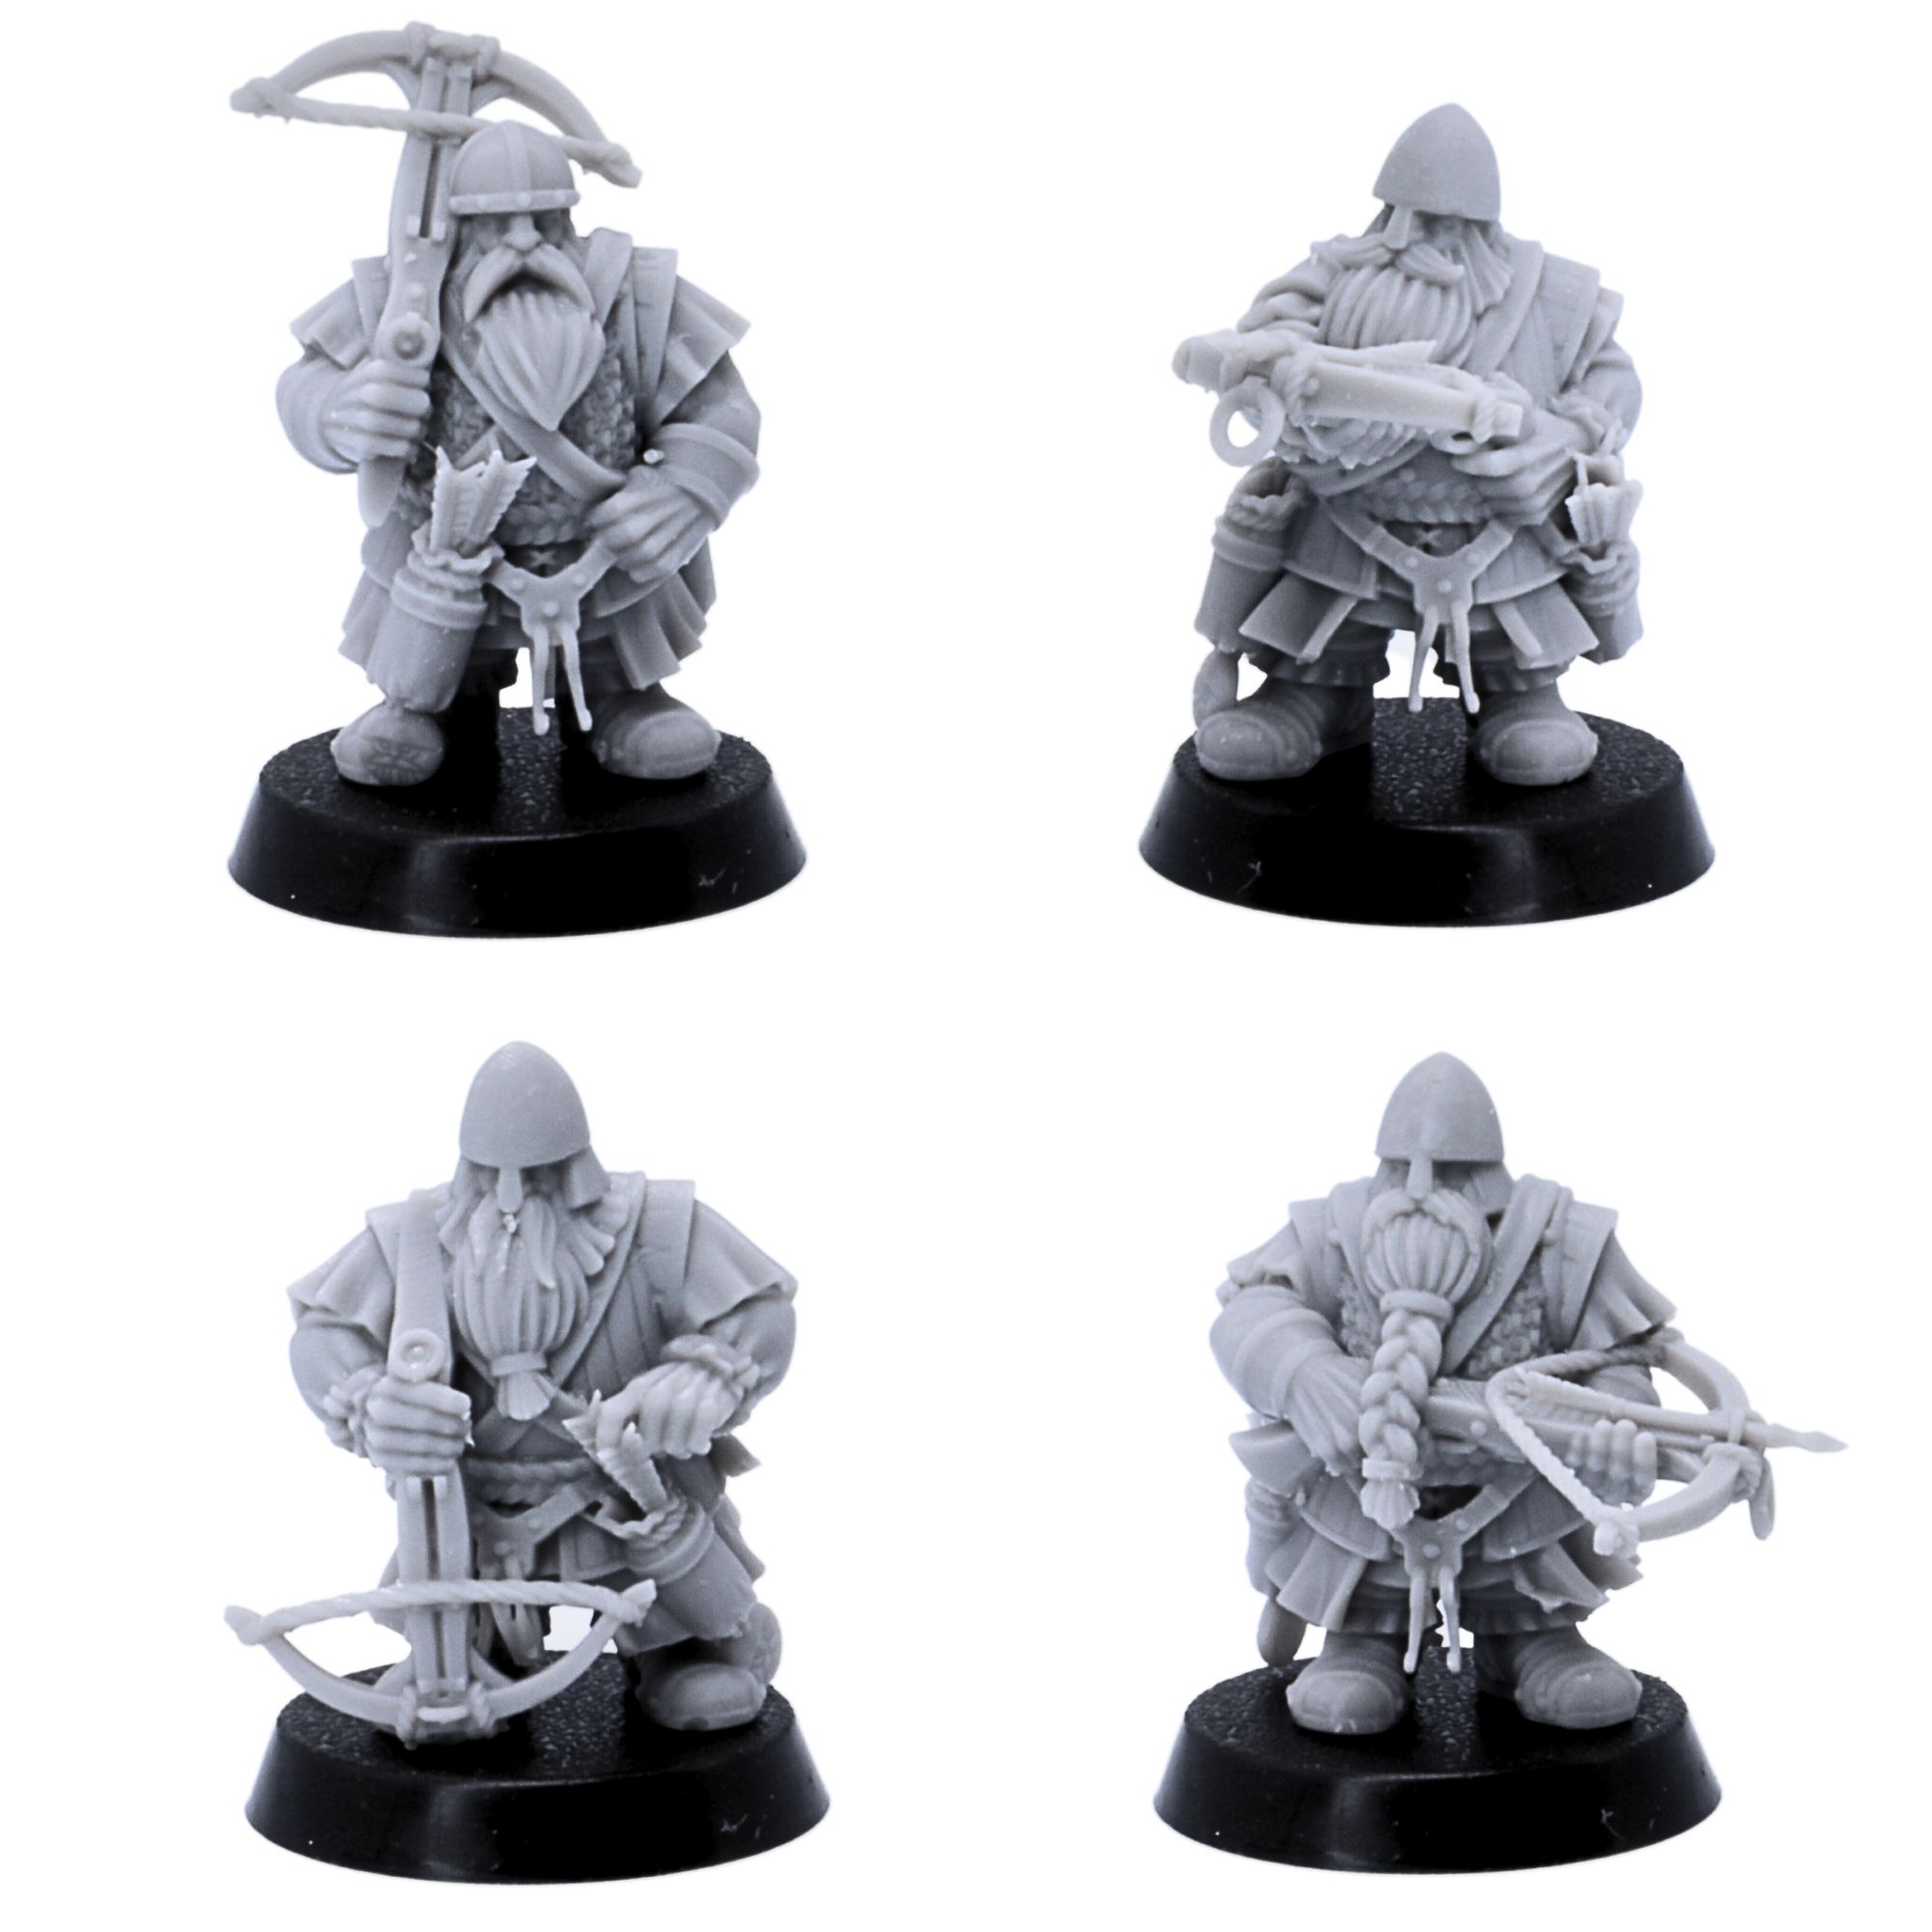 Archer Minis by Highlands Minis